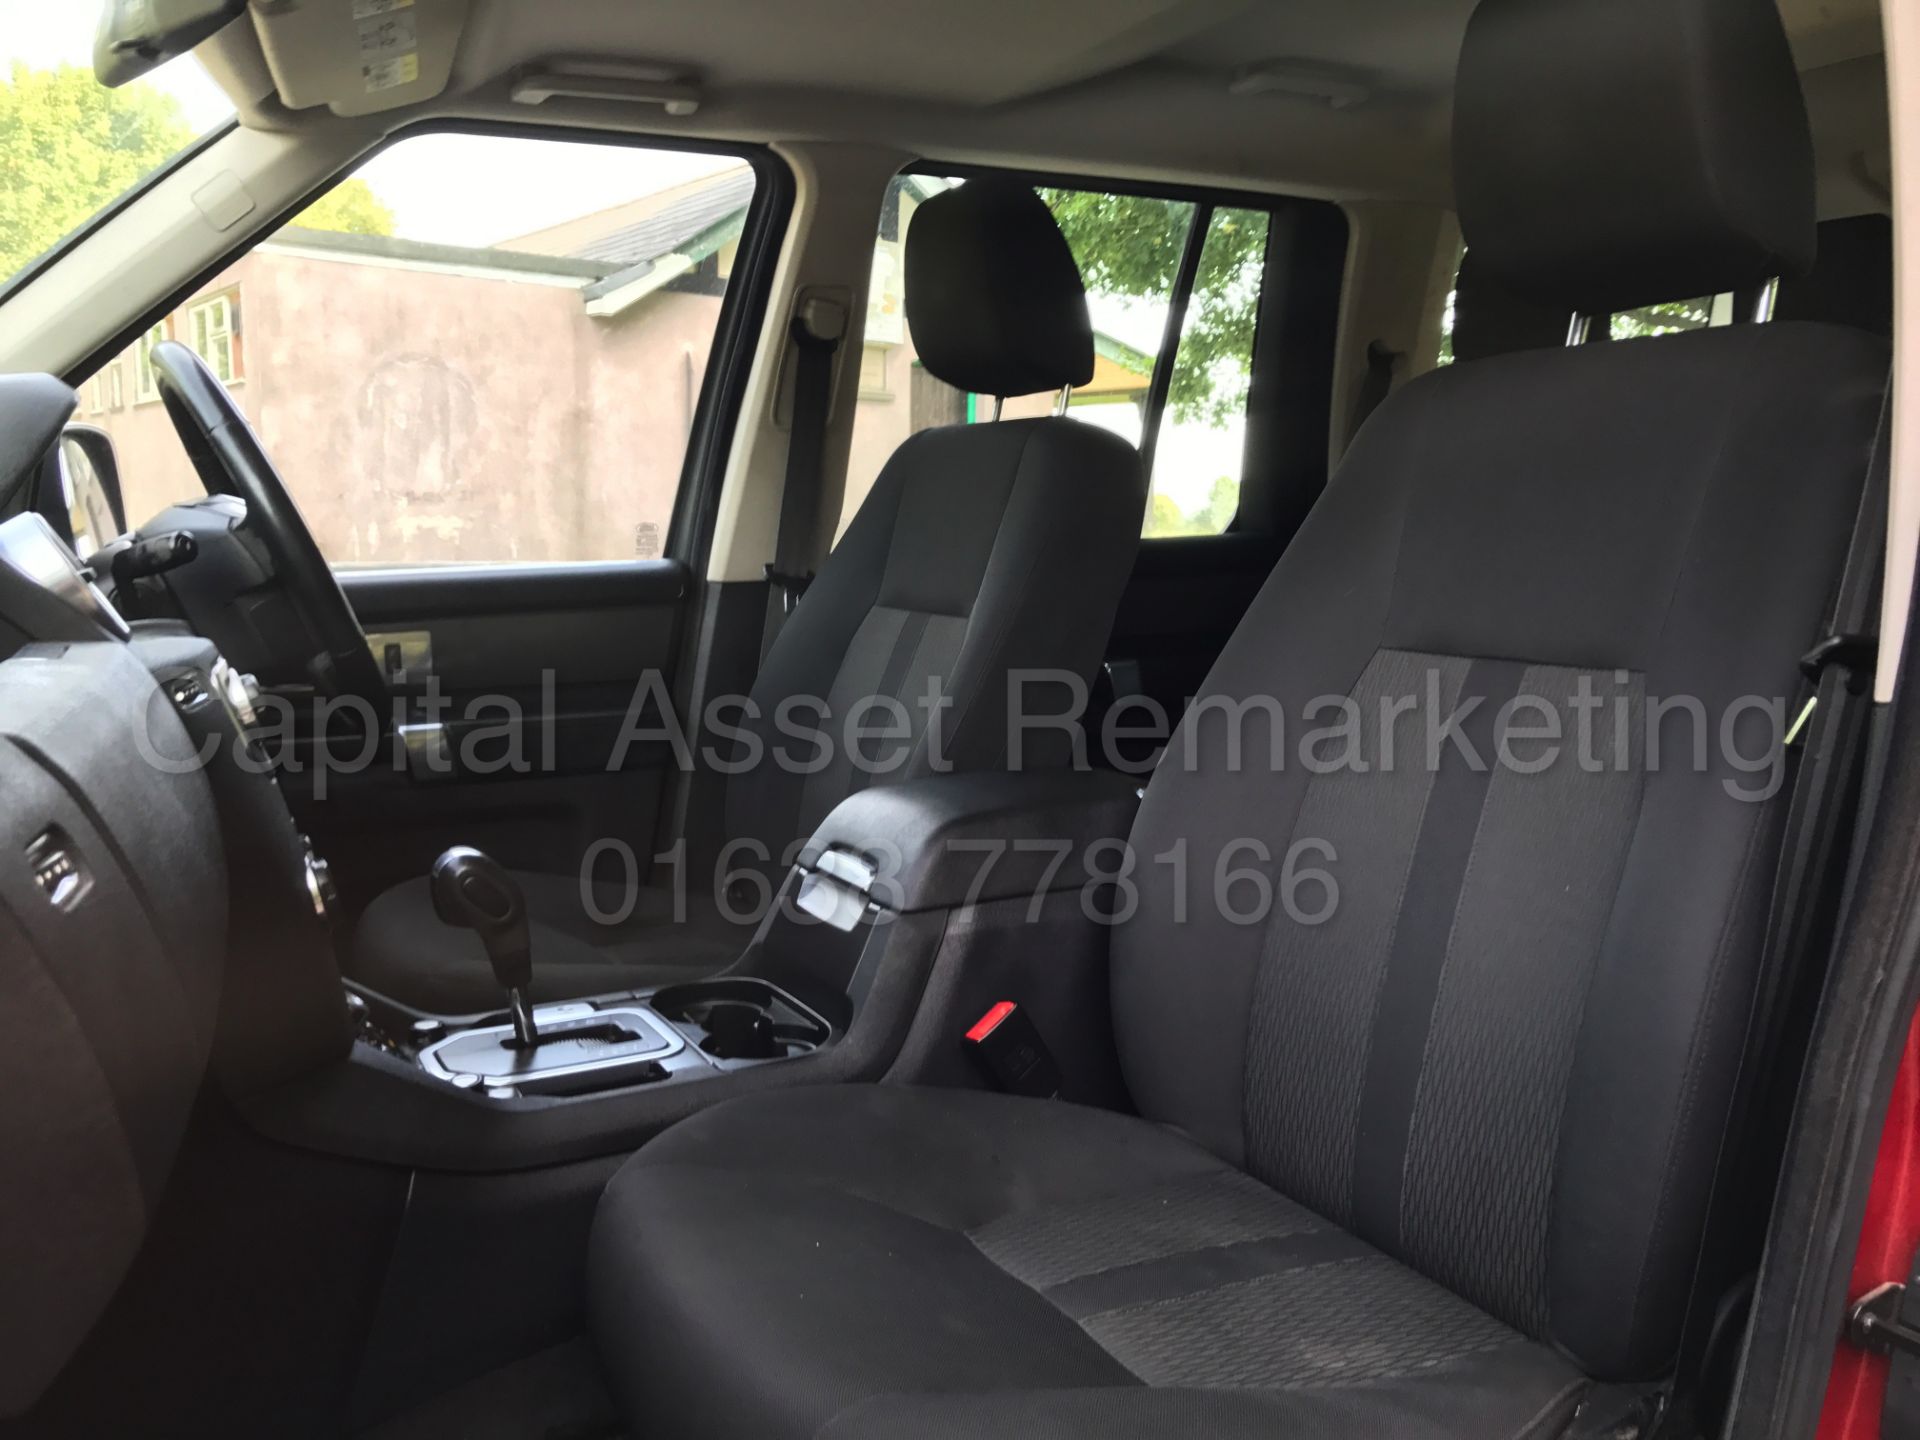 (On Sale) LAND ROVER DISCOVERY 4 (2011 MODEL) '3.0 SDV6 - 245 BHP - AUTO TIP TRONIC - 7 SEATER' - Image 14 of 30